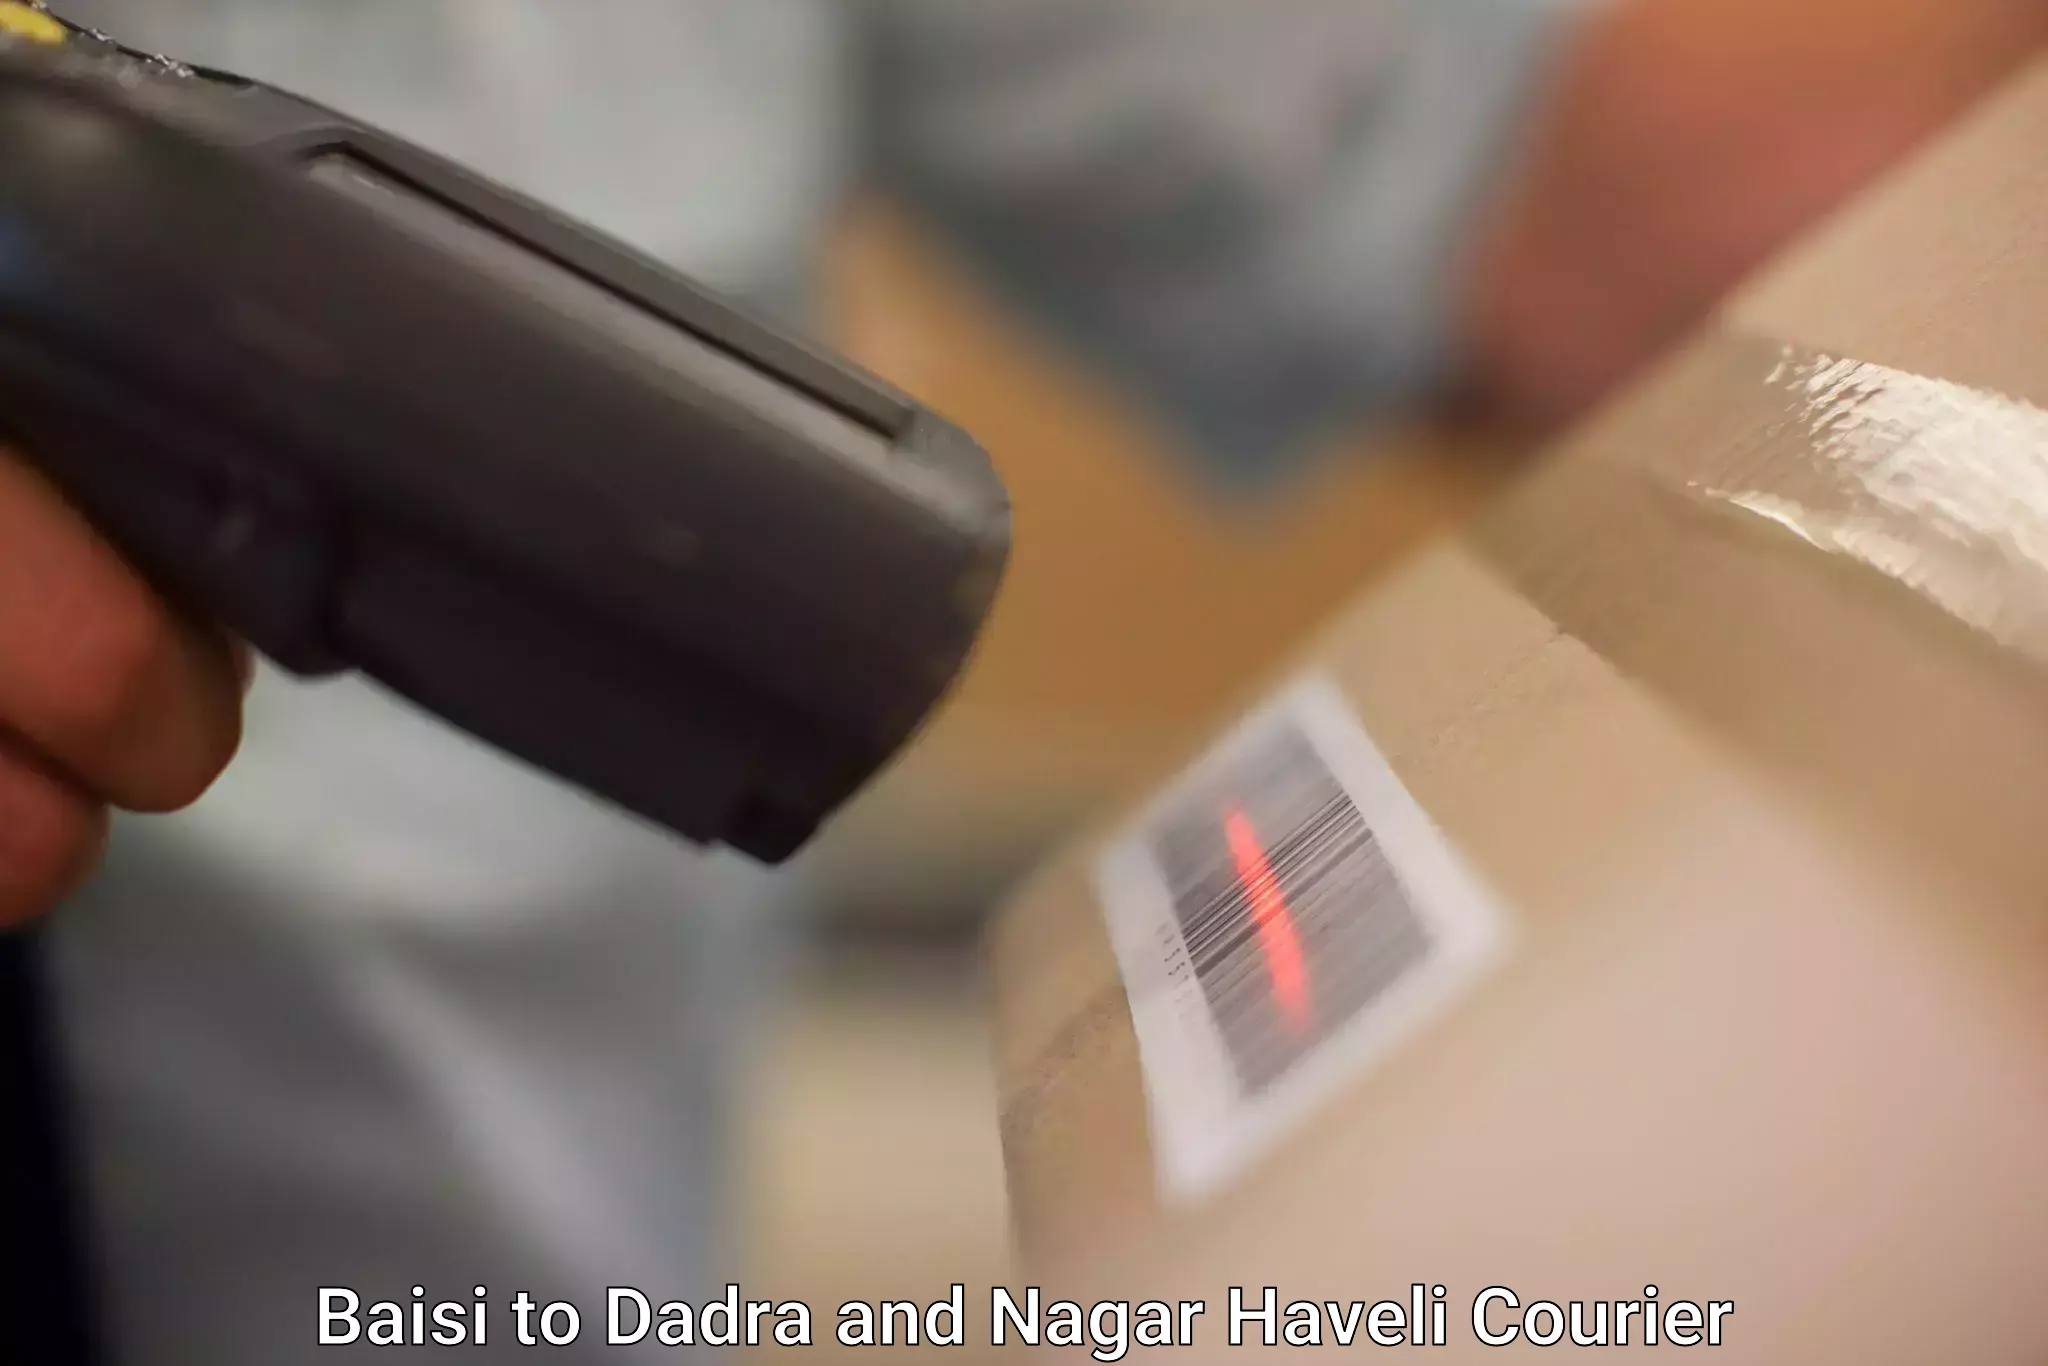 Courier tracking online Baisi to Dadra and Nagar Haveli